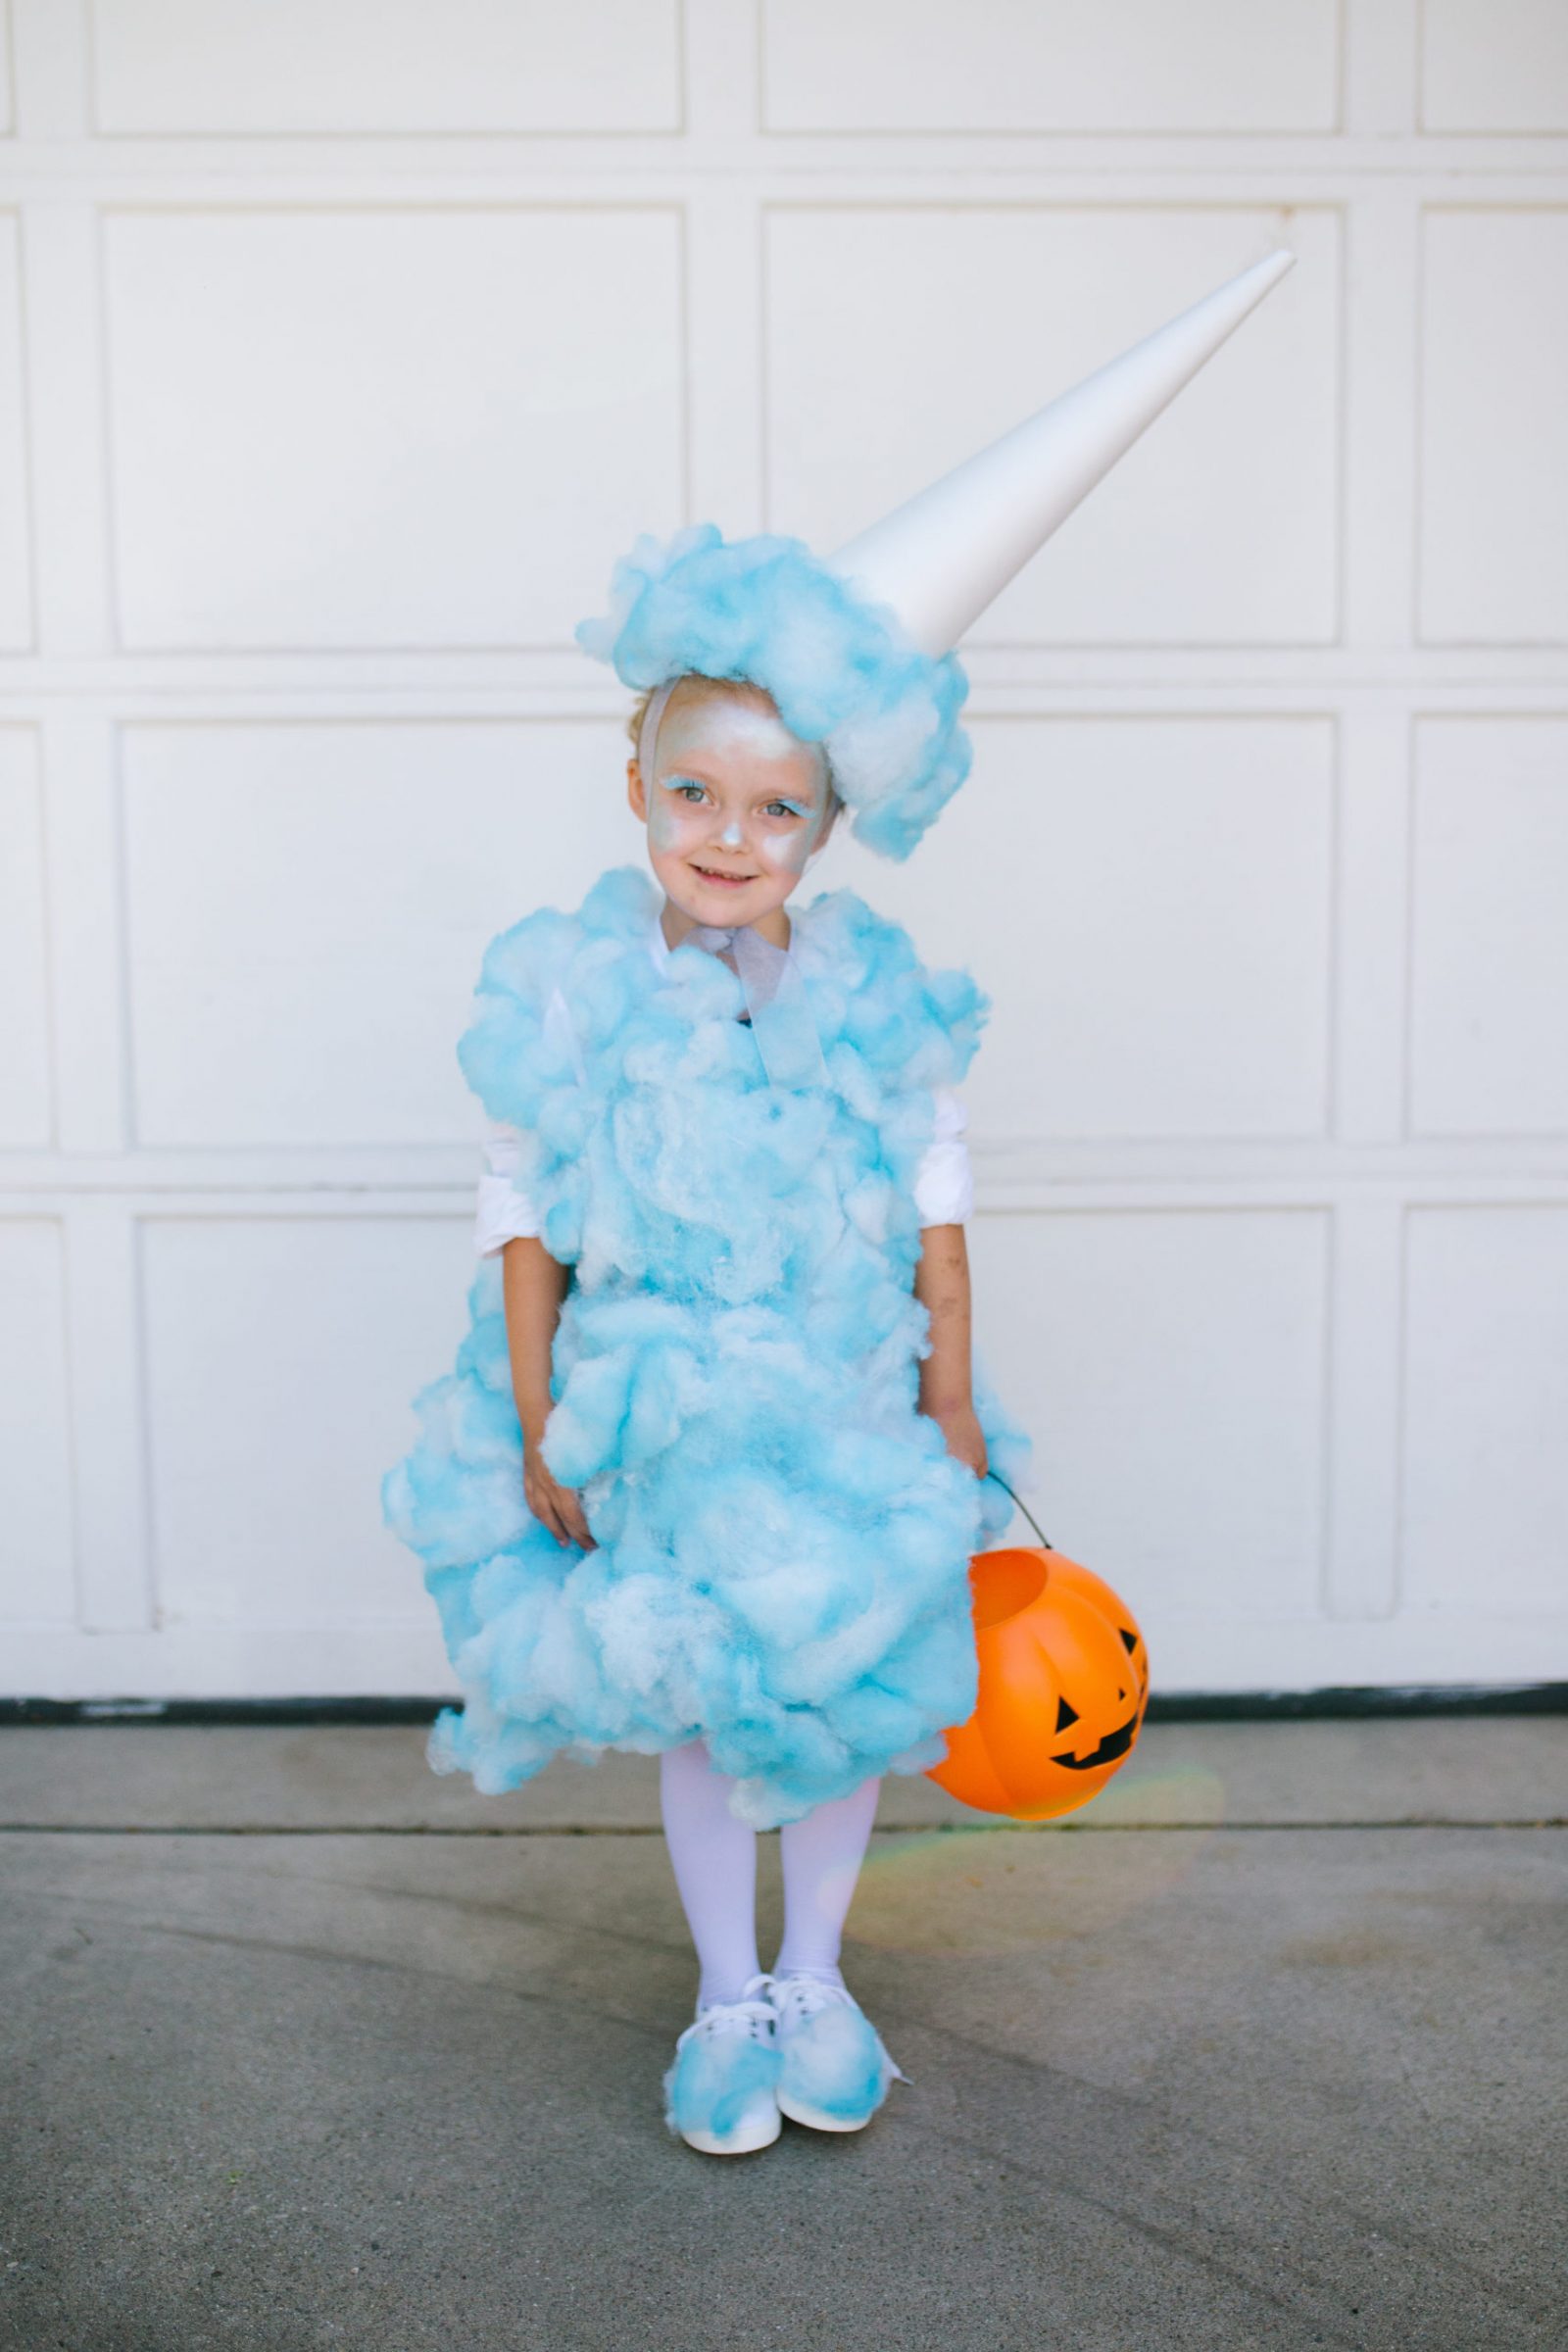 Halloween Costume Ideas: DIY Cotton Candy Costume for Kids | The Pretty ...